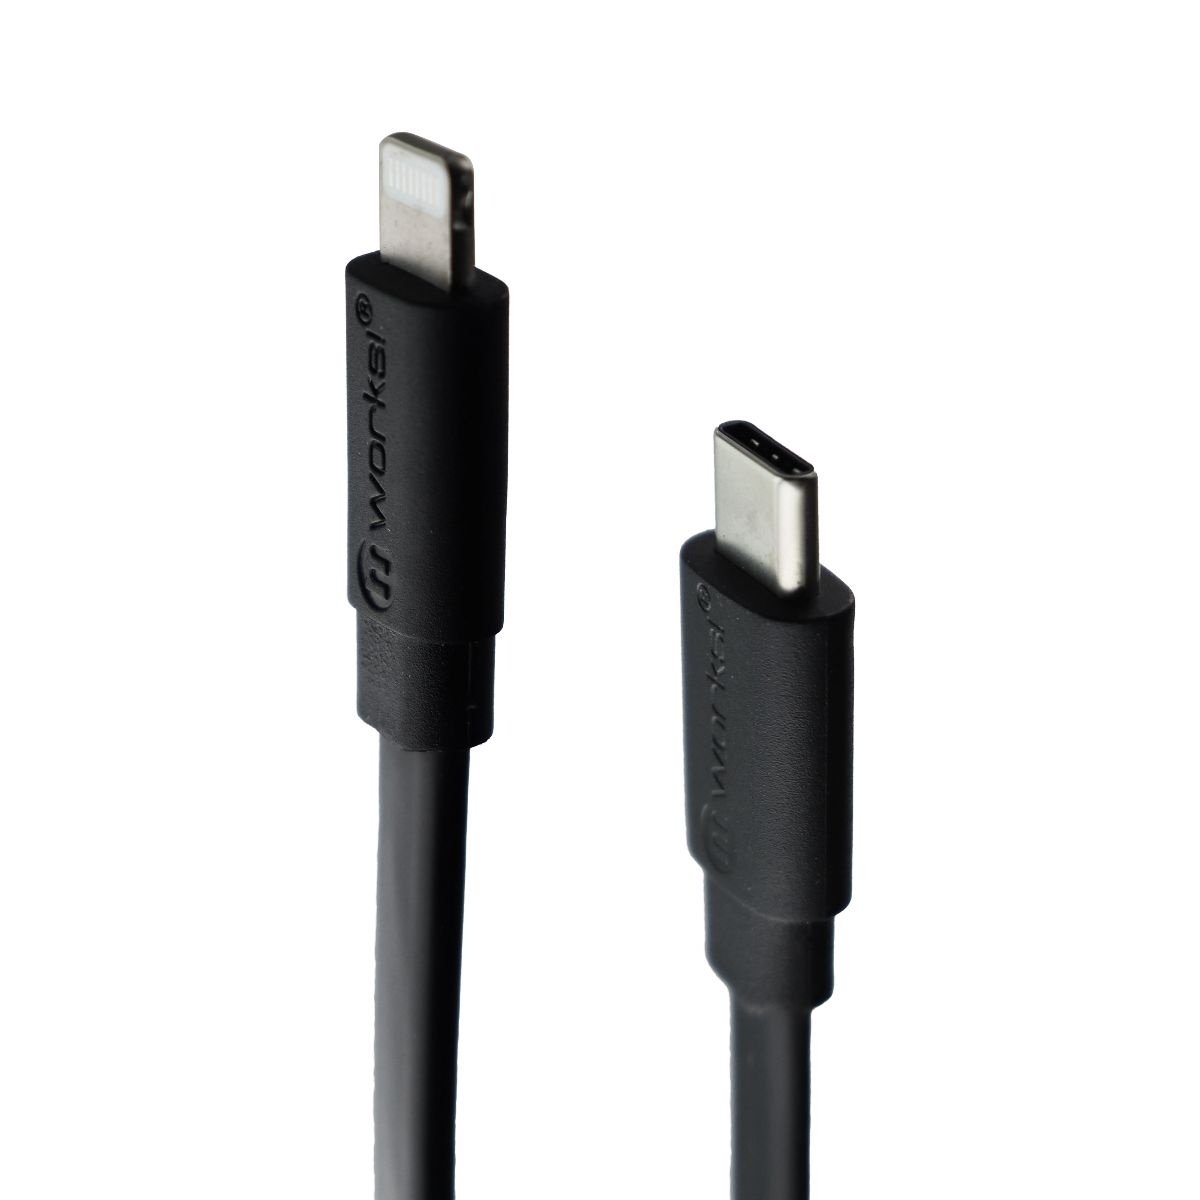 MWorks! MPower! Flat USB-C To Lightning 8-Pin Cable For IPhone/iPad - Black